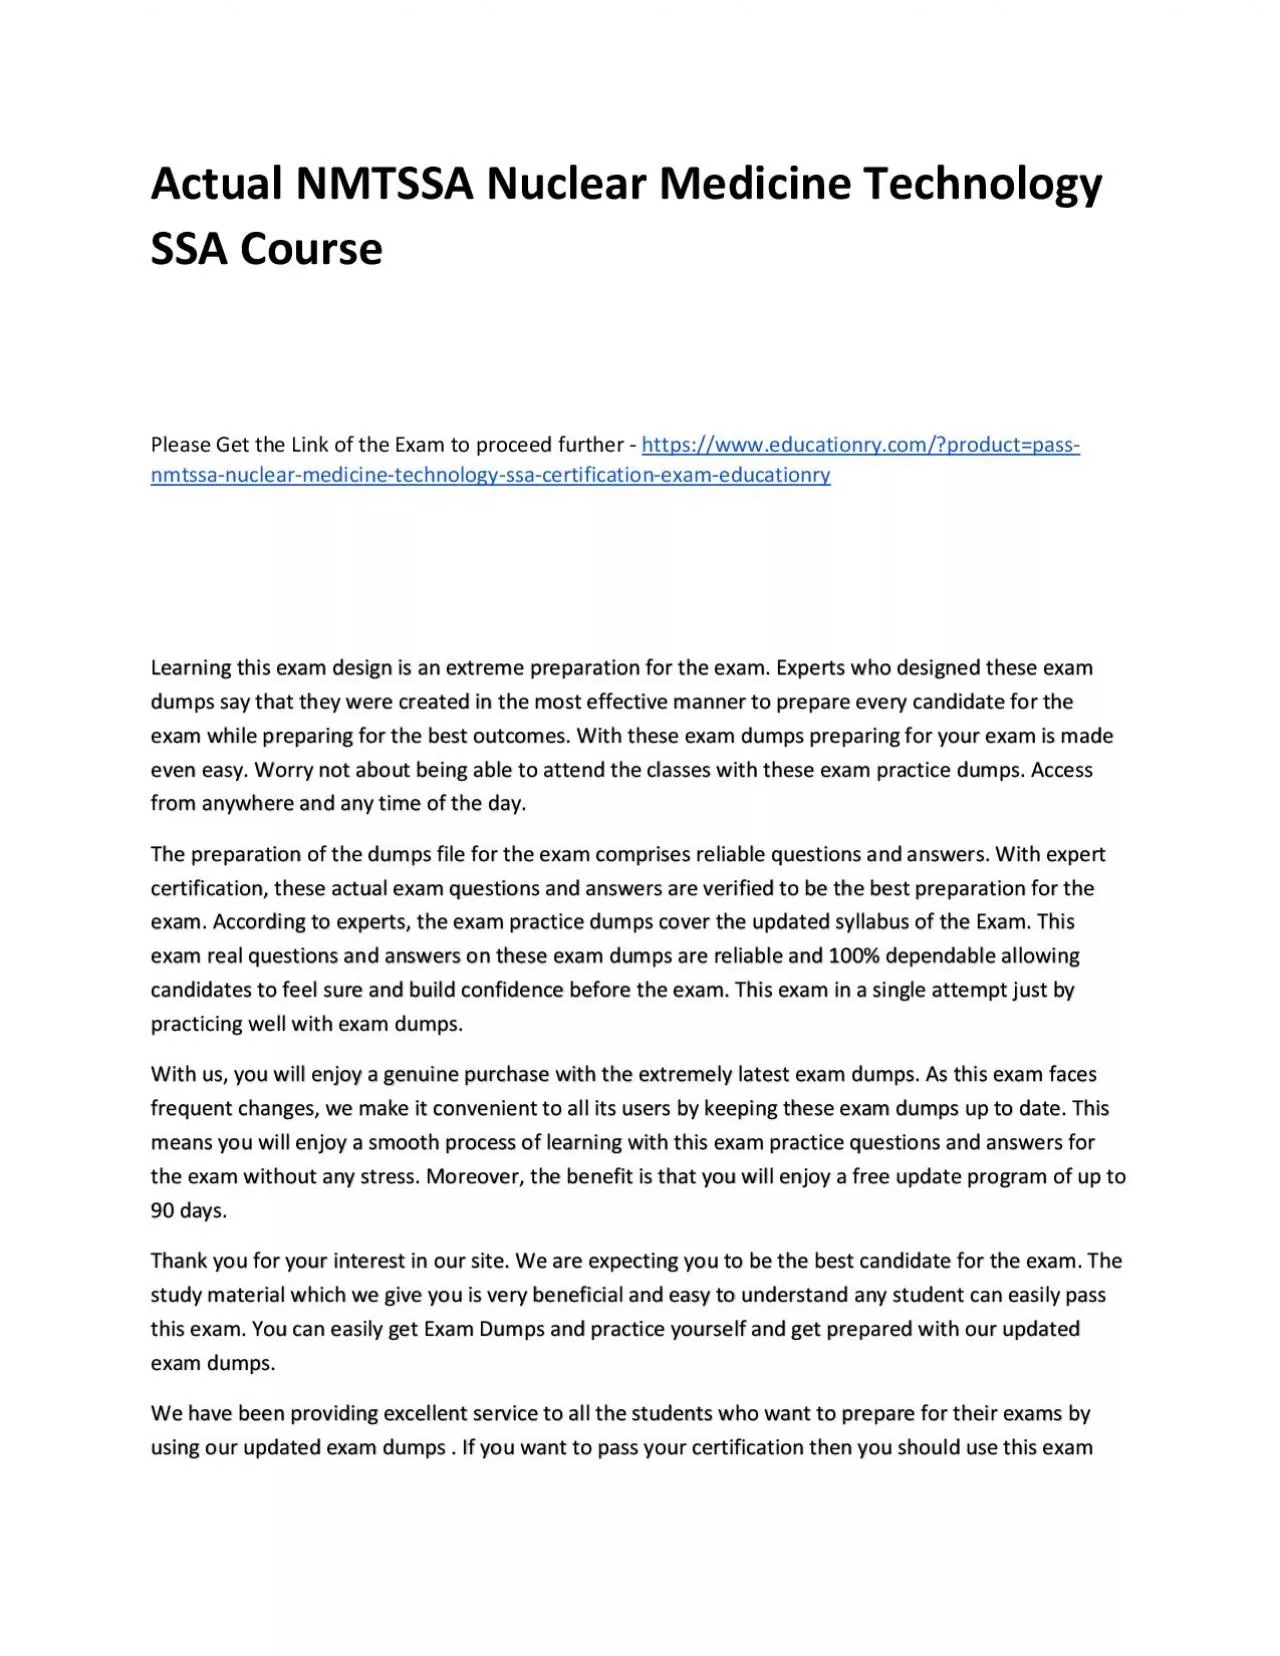 Actual NMTSSA Nuclear Medicine Technology SSA Practice Course